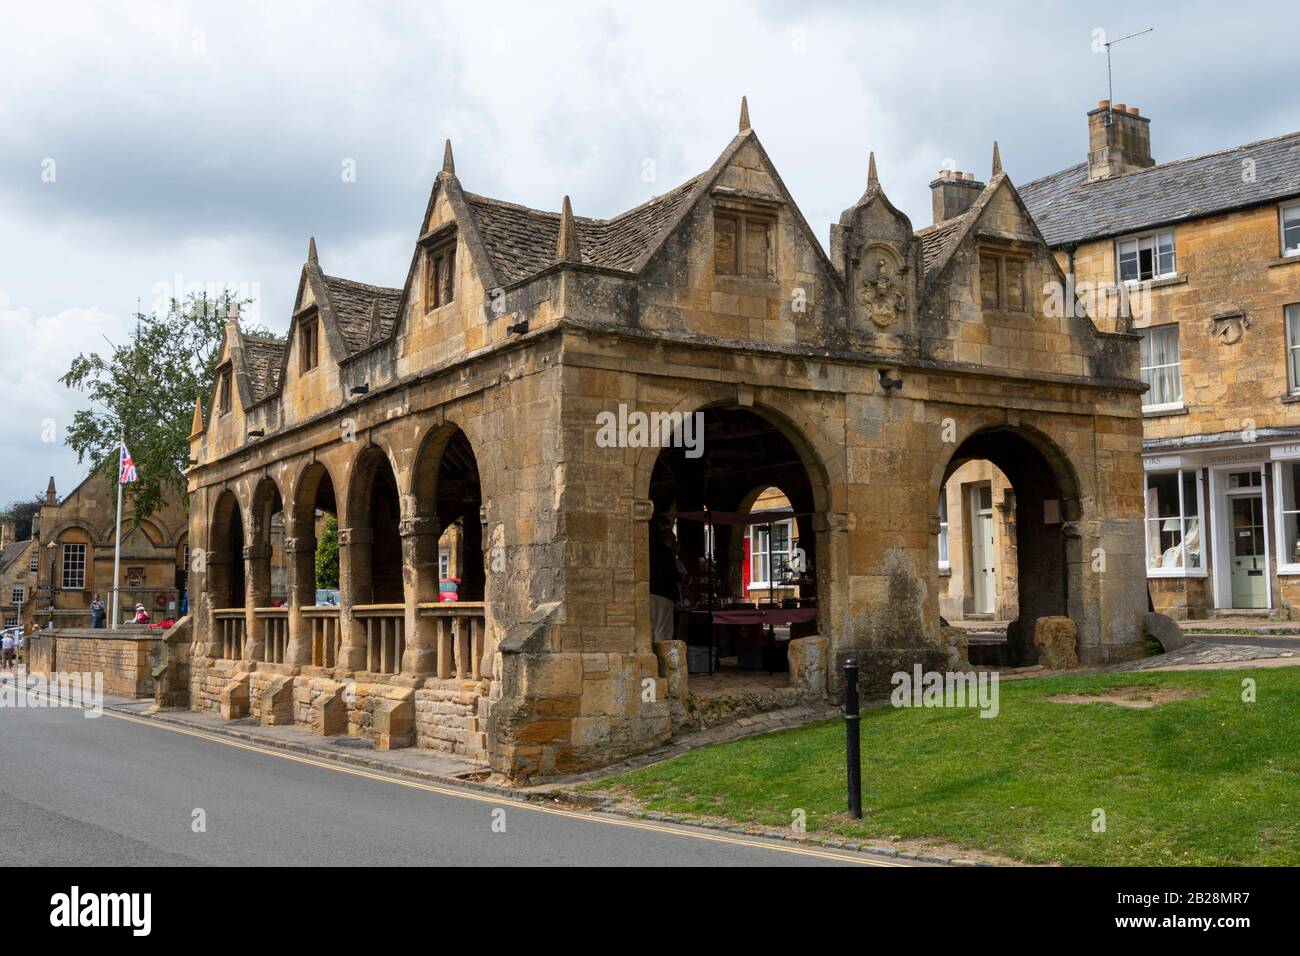 Market Hall, High Street, Chipping Campden, Gloucestershire, Cotswolds, Angleterre Banque D'Images